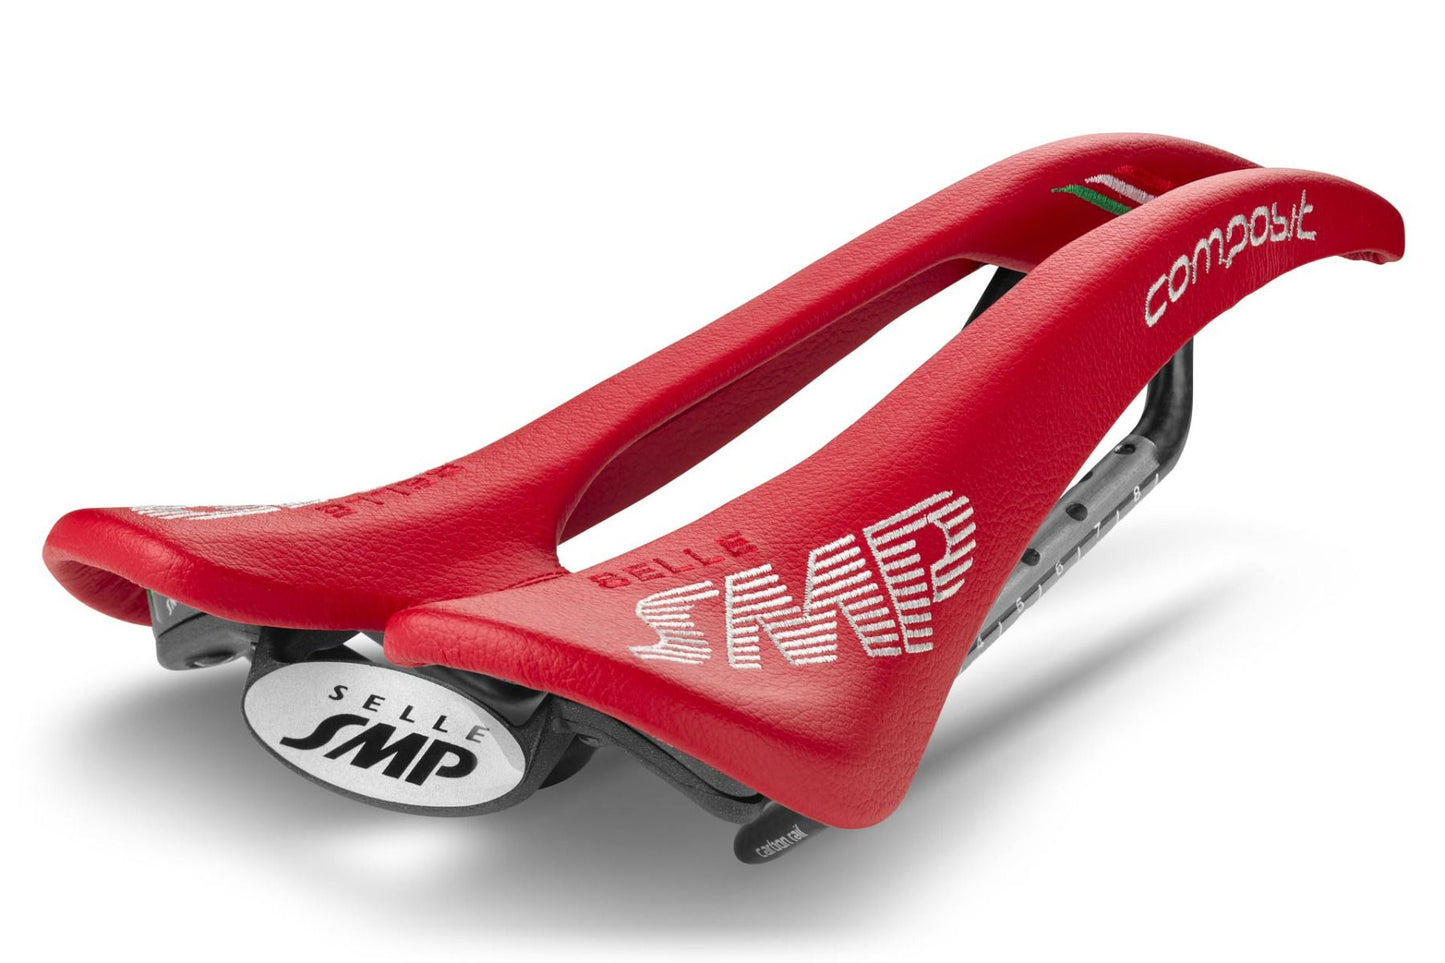 Selle SMP Composit Saddle with Carbon Rails (Red)